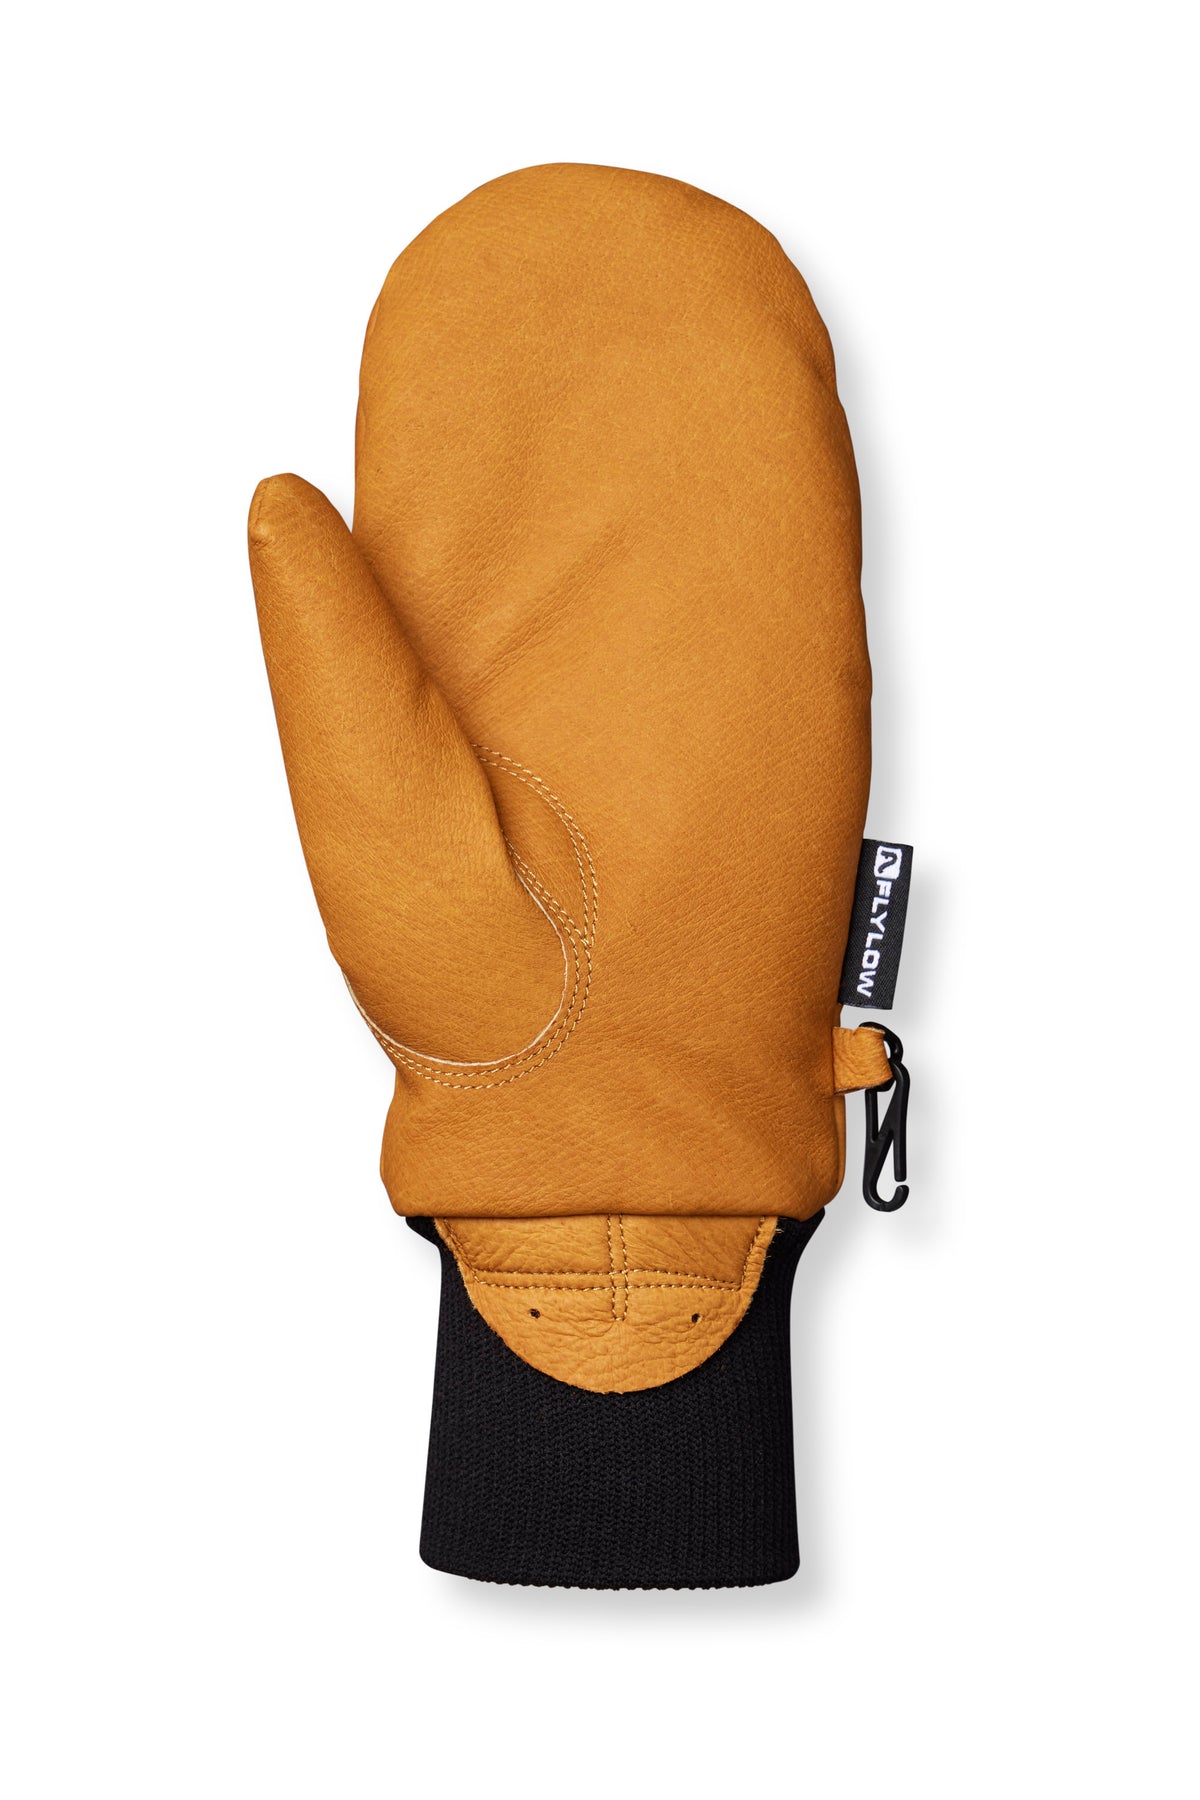 The Best Oven Mitts to Buy in 2021 - Product Recommendations - The